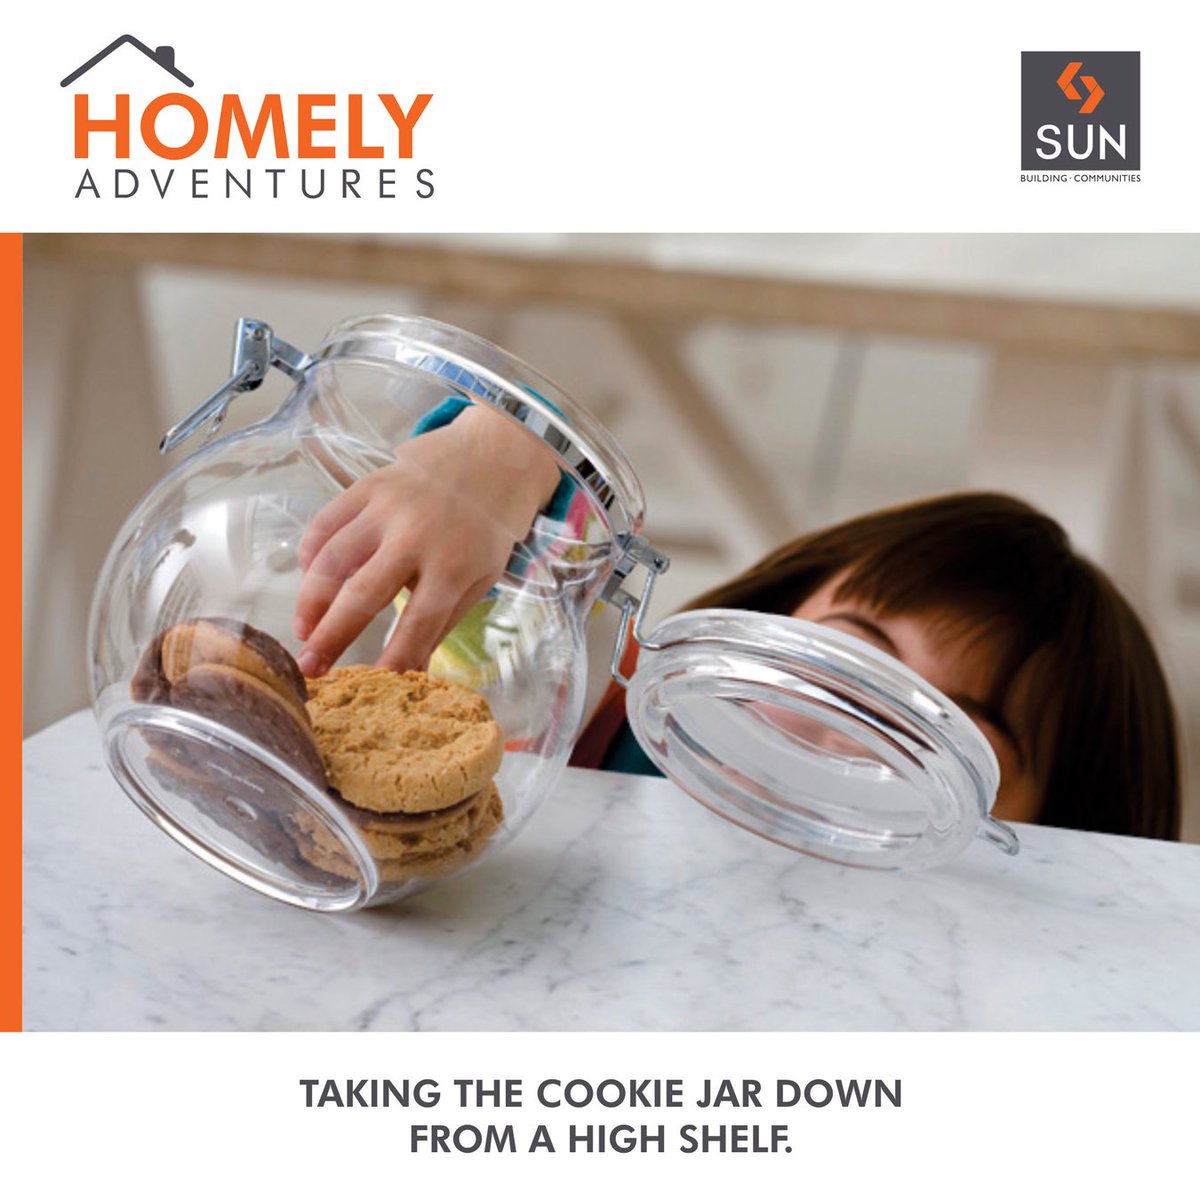 #HomelyAdventures:
It is all about the adventures done by children in your home that becomes memorable forever. https://t.co/5y07QoDAG1